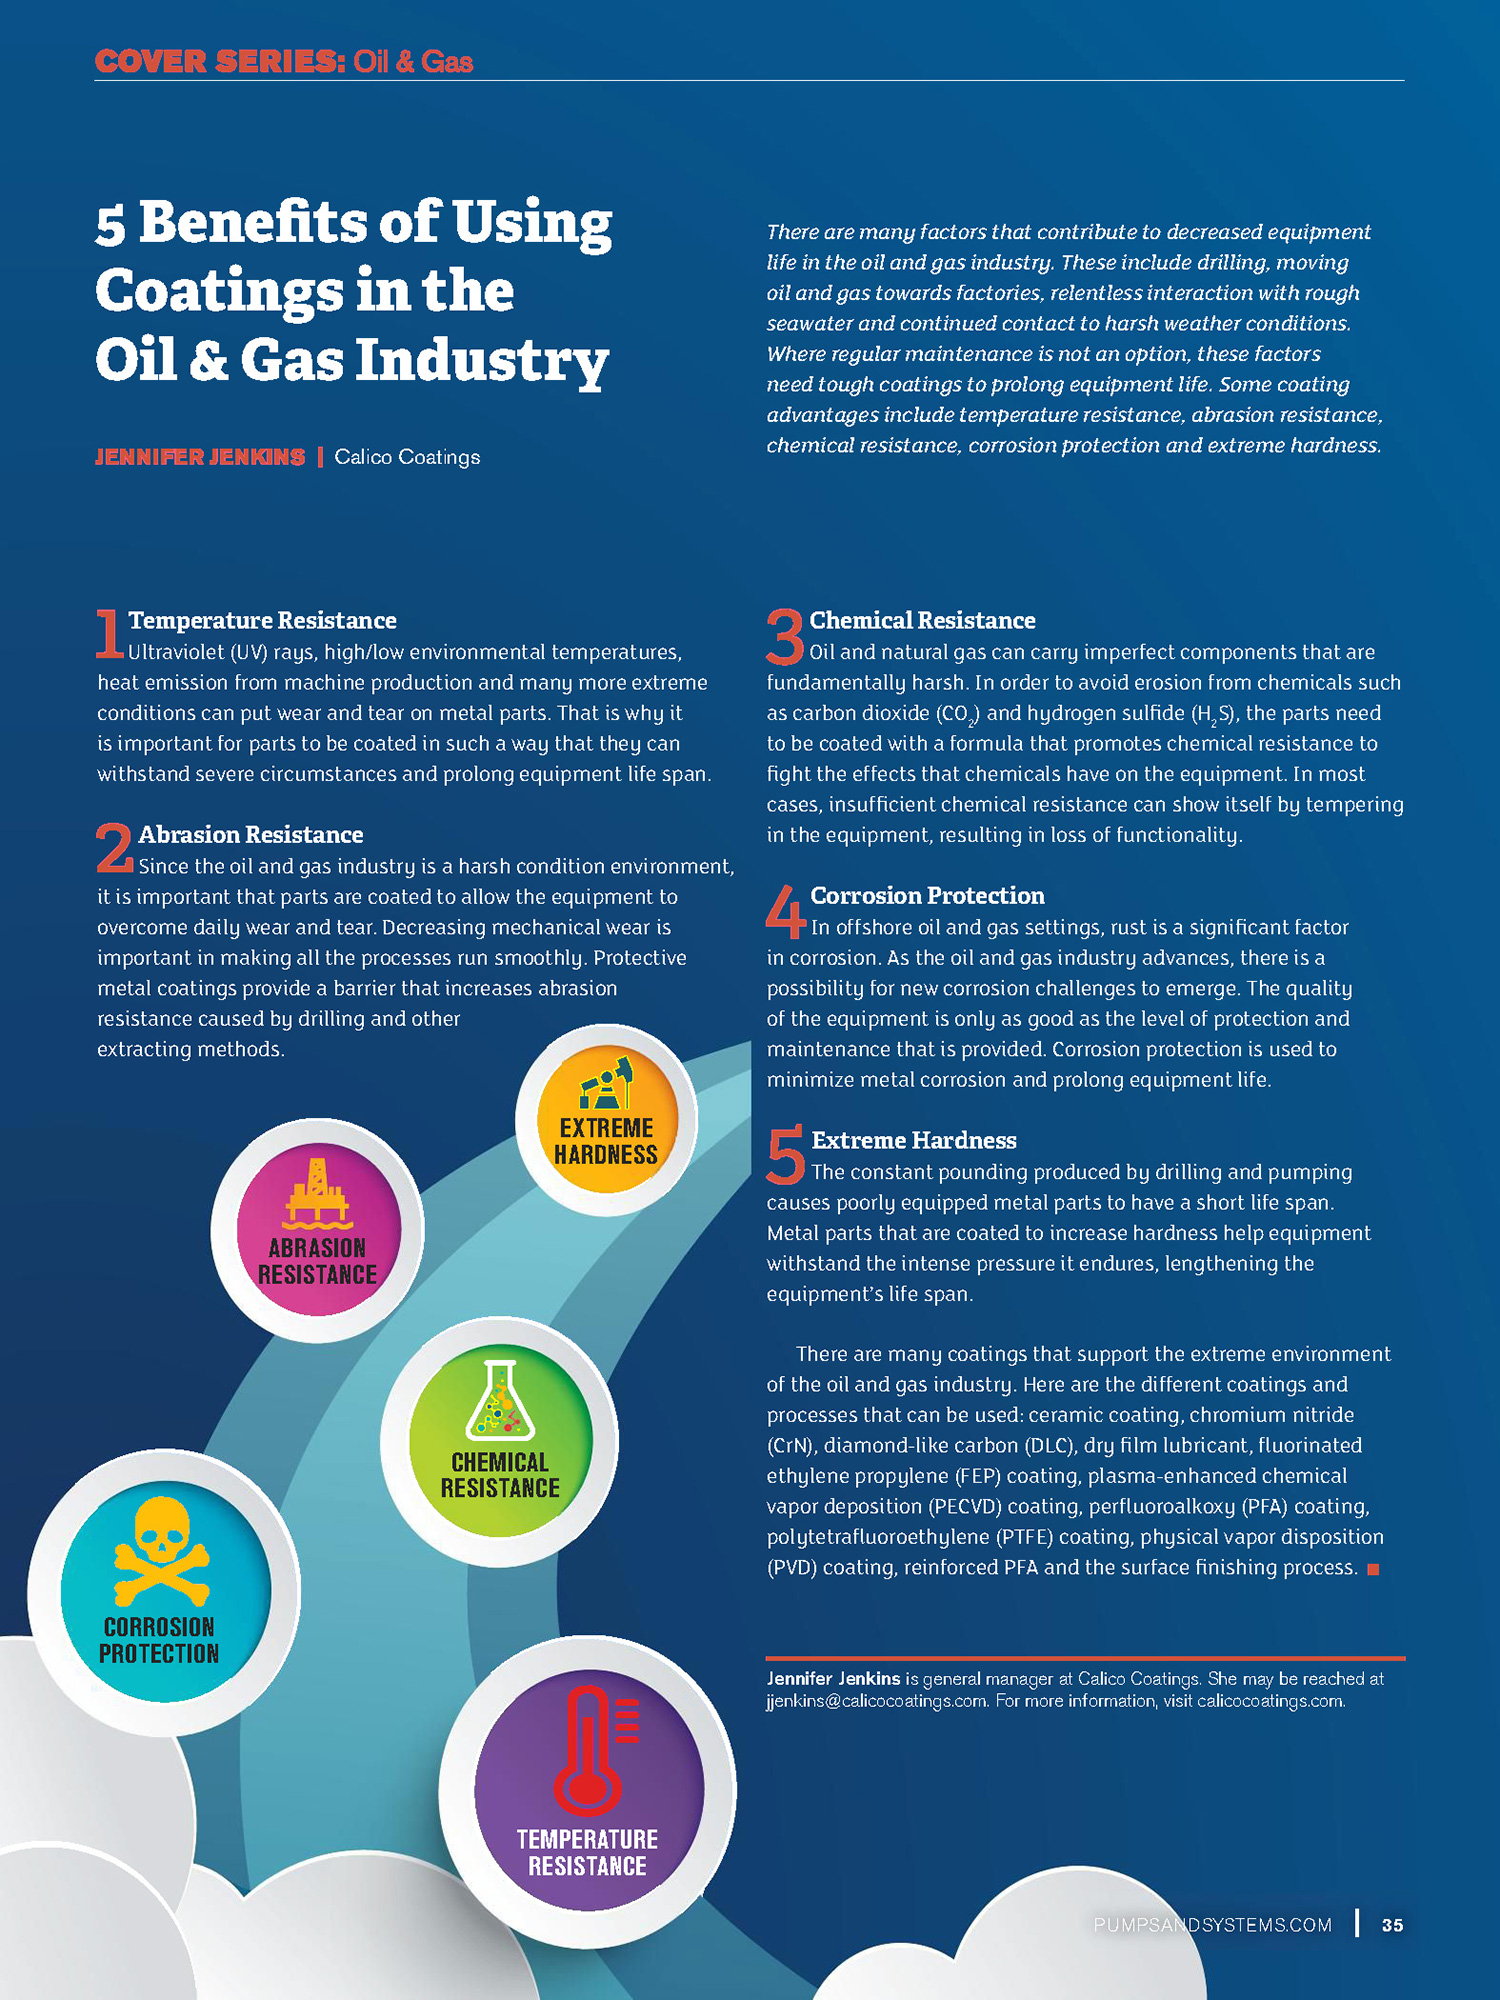 5 Benefits of Using Coatings in the Oil & Gas Industry